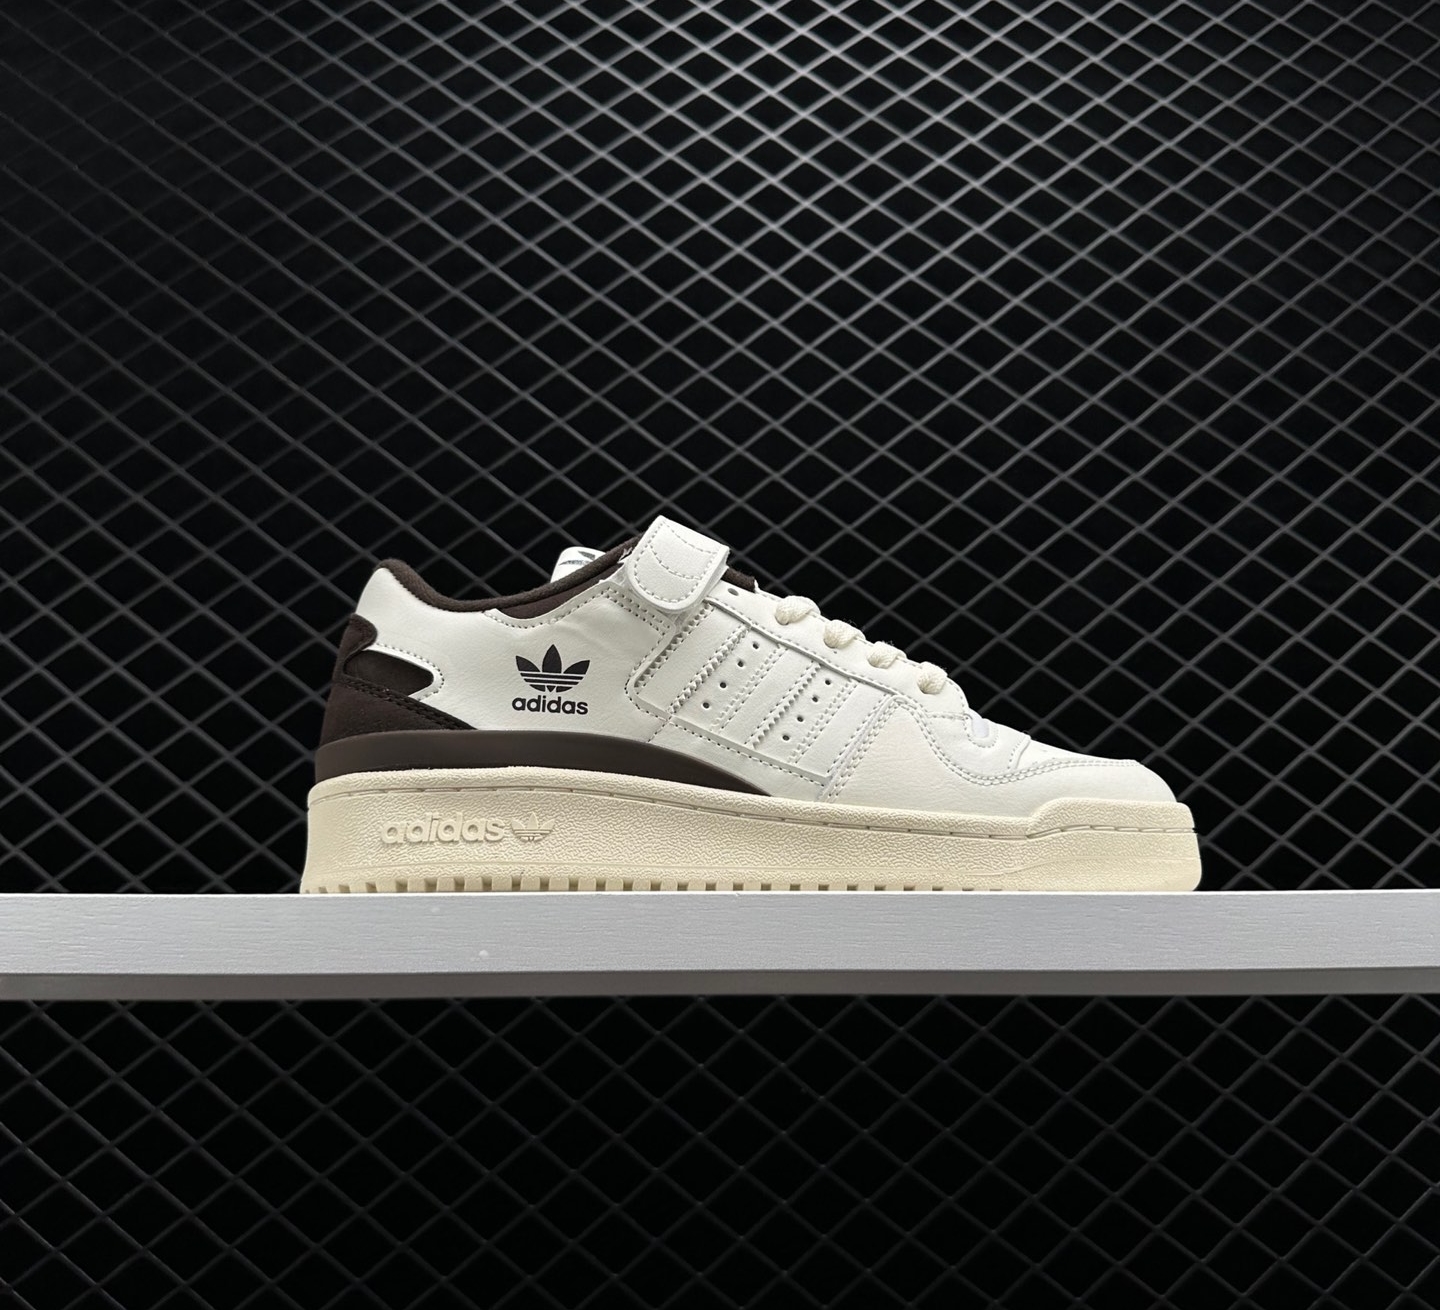 Adidas Forum 84 Low Cream White Brown GZ8959 – Classic Style with a Modern Twist